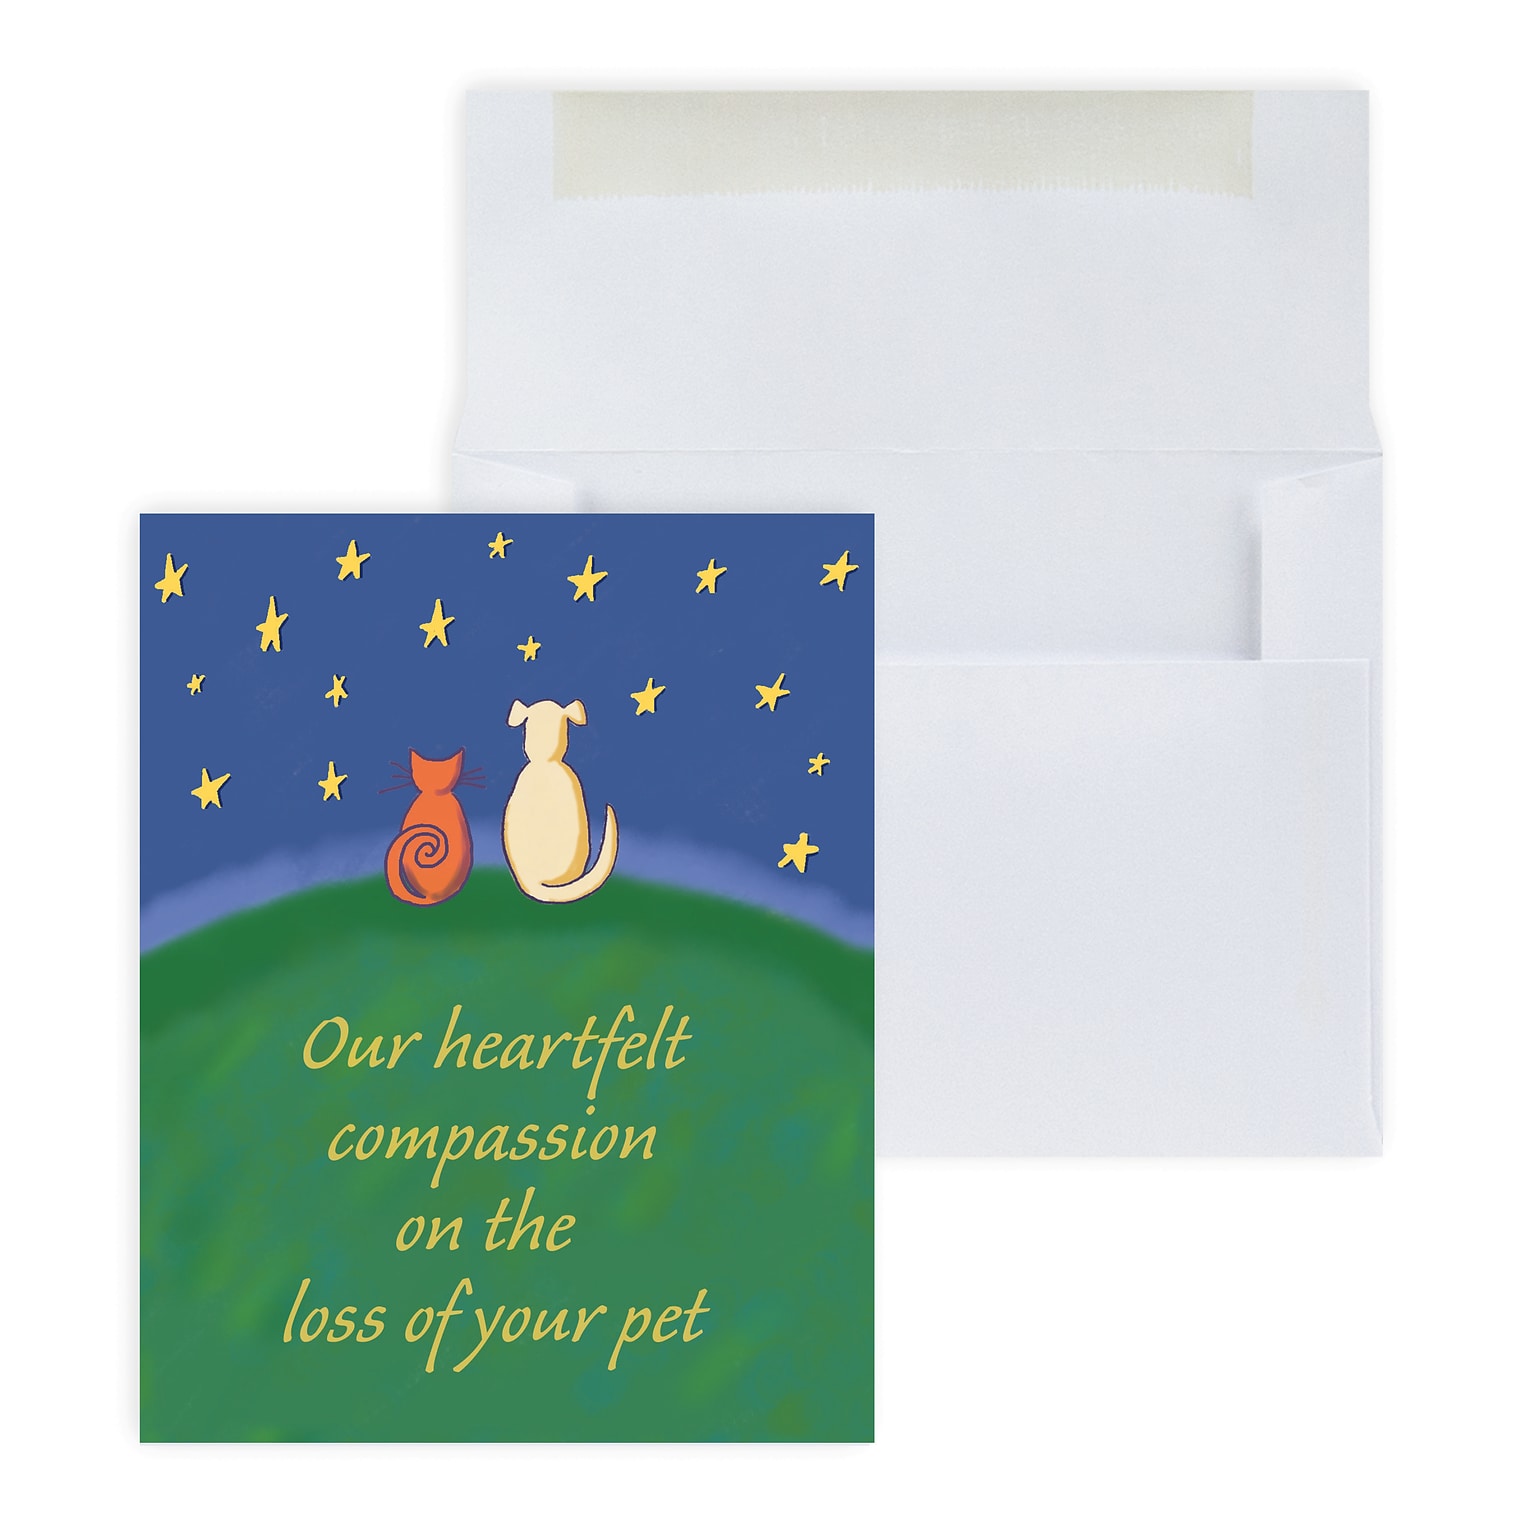 Custom Compassion Pet Loss Sympathy Cards, With Envelopes, 5-3/8 x 4-1/4, 25 Cards per Set